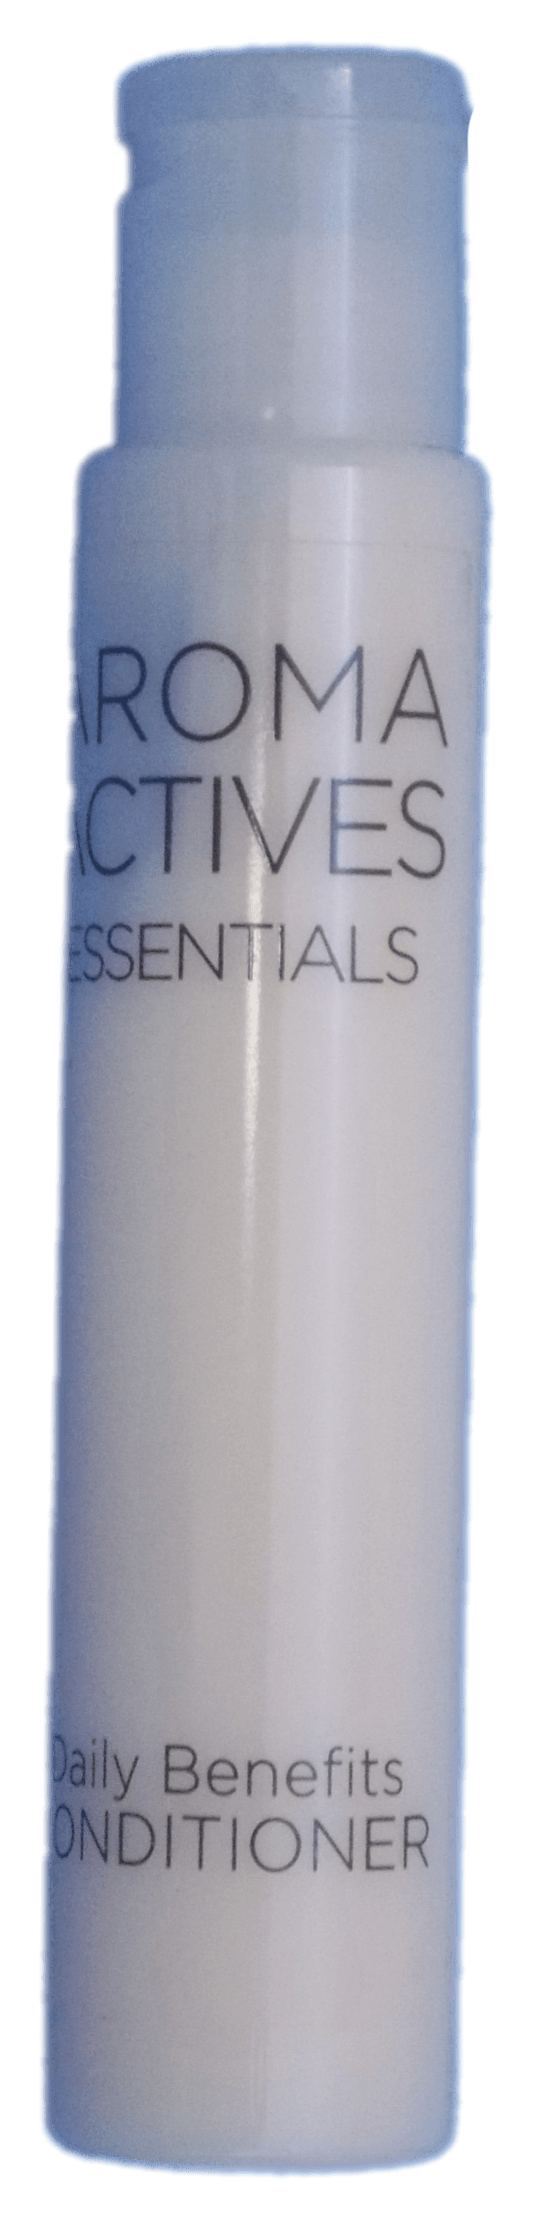 Discount clearance closeout open box and discontinued Aroma Actives Guest Amenities | Aroma Actives Conditioner 1 OZ Guest Amenities Supplies Personal Care - Rental HQ